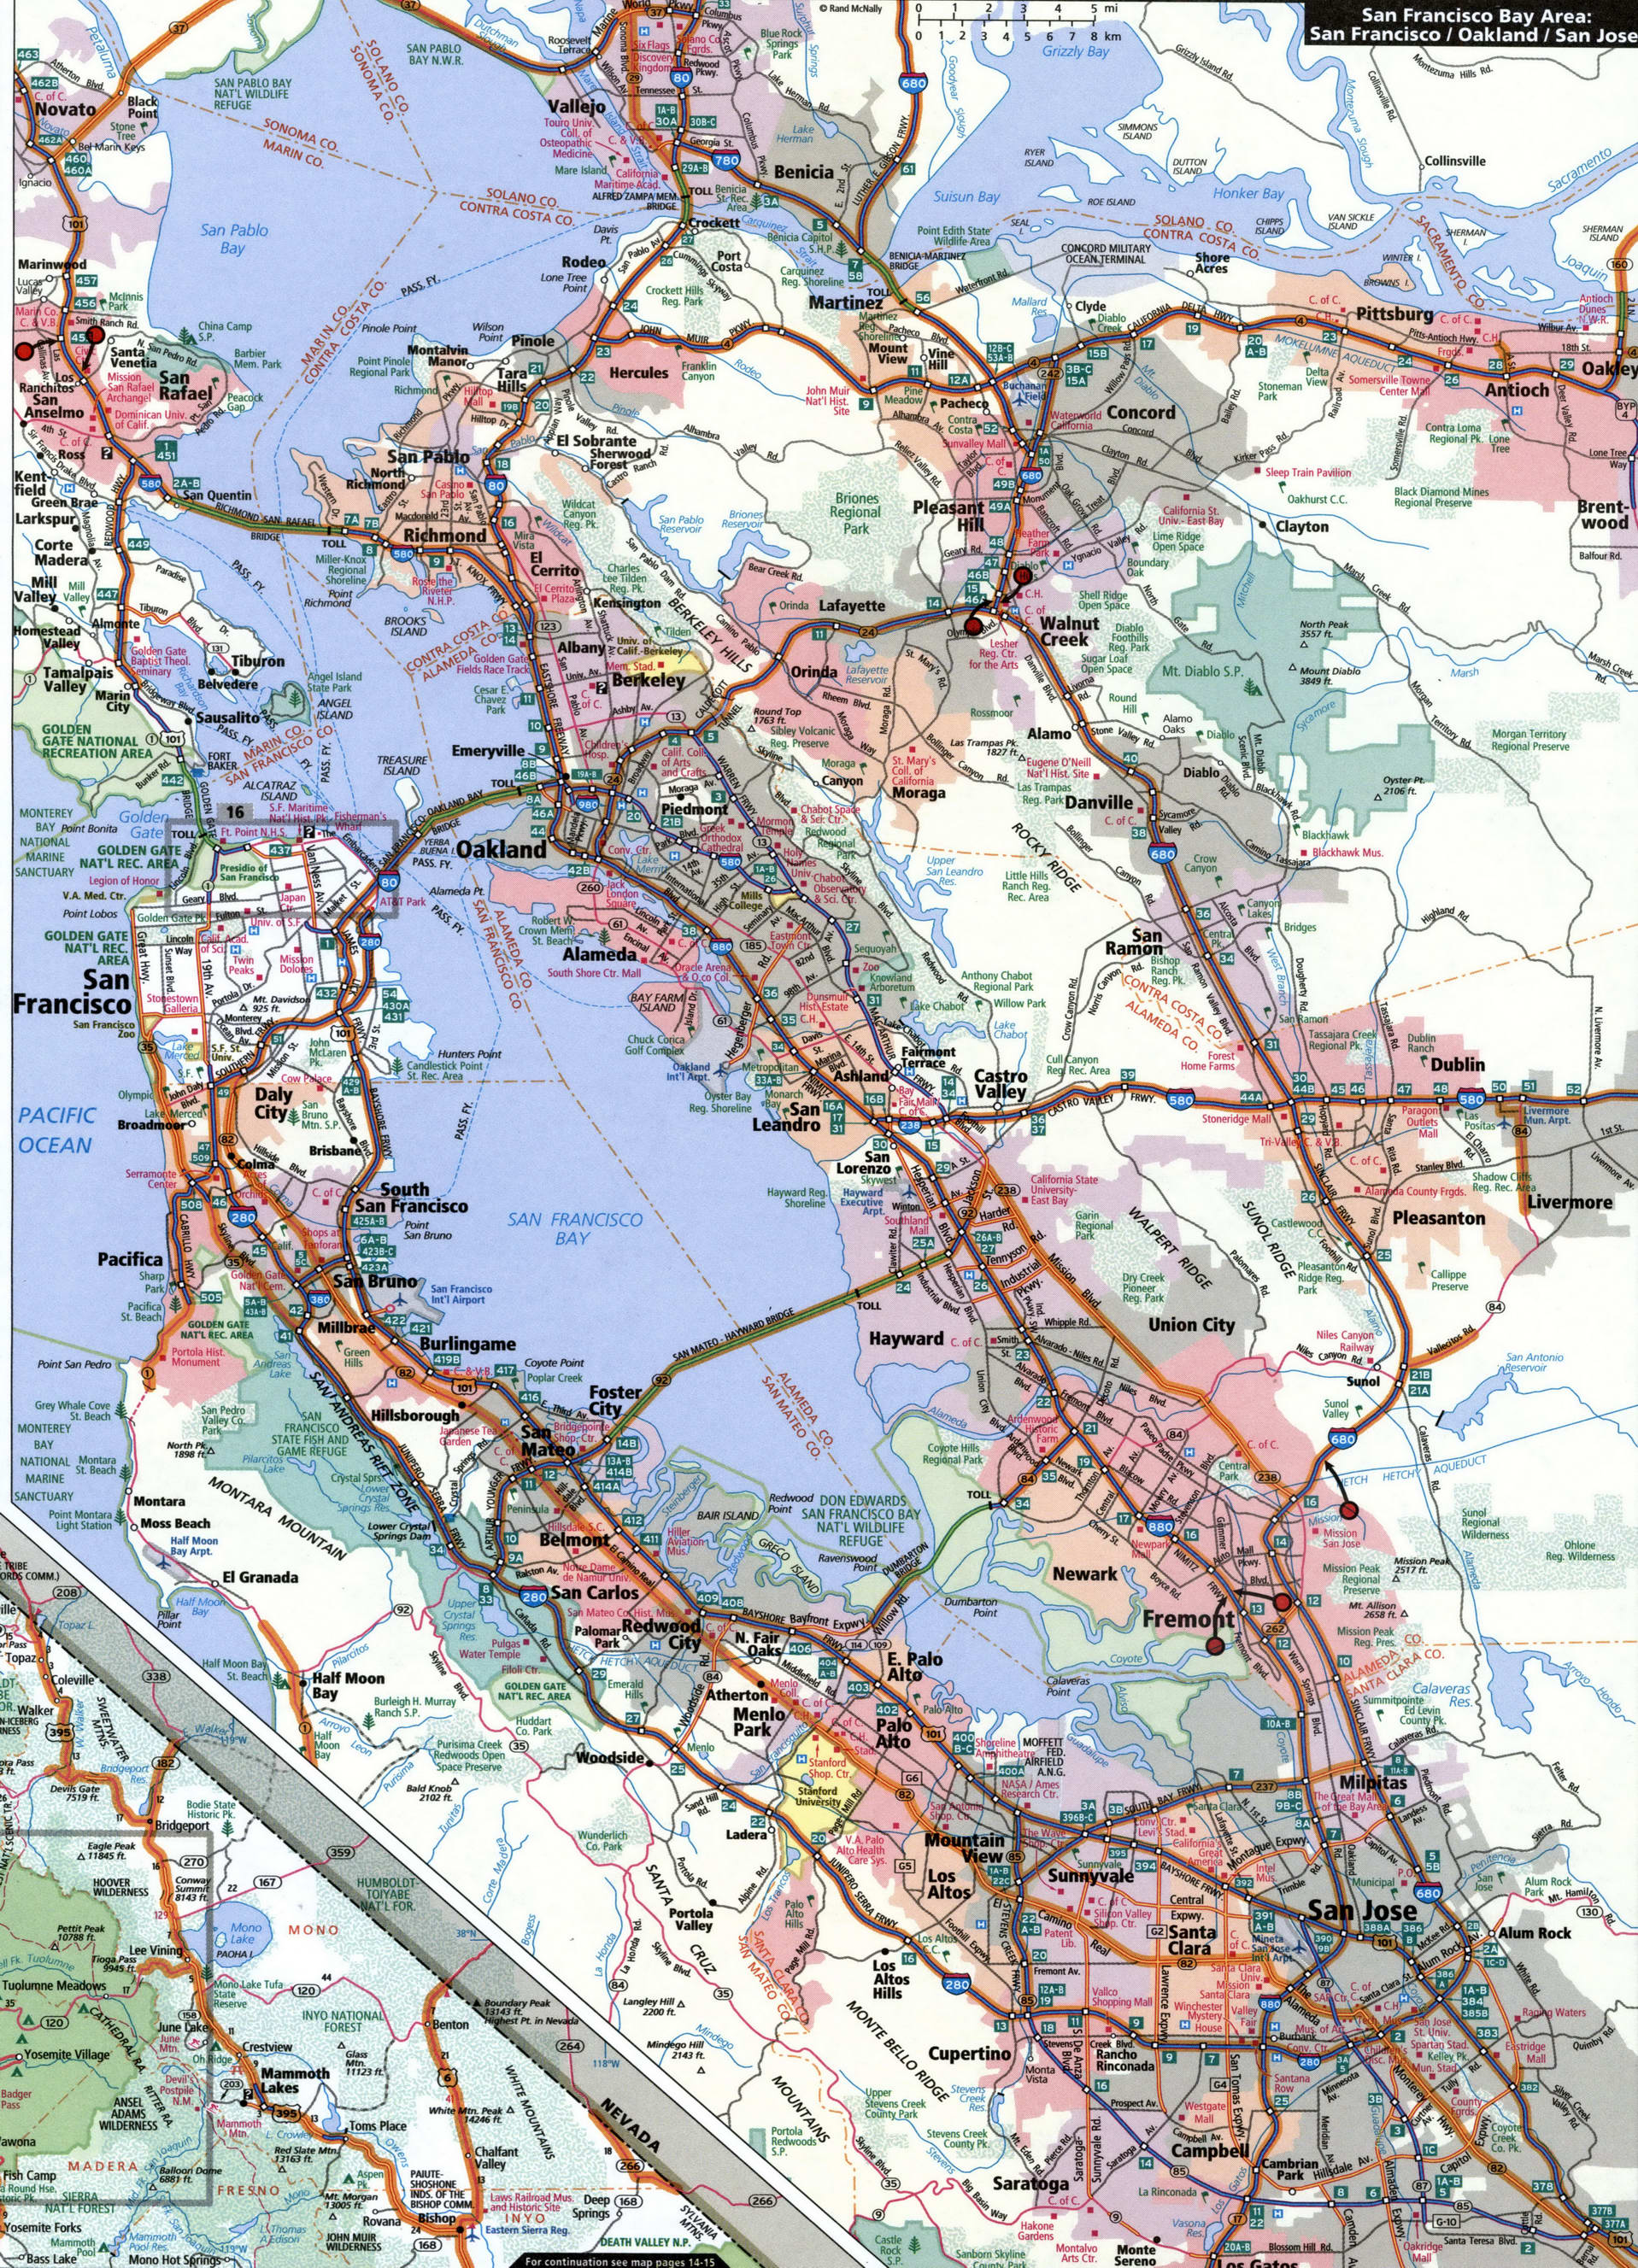 San Francisco bay area map for truckers